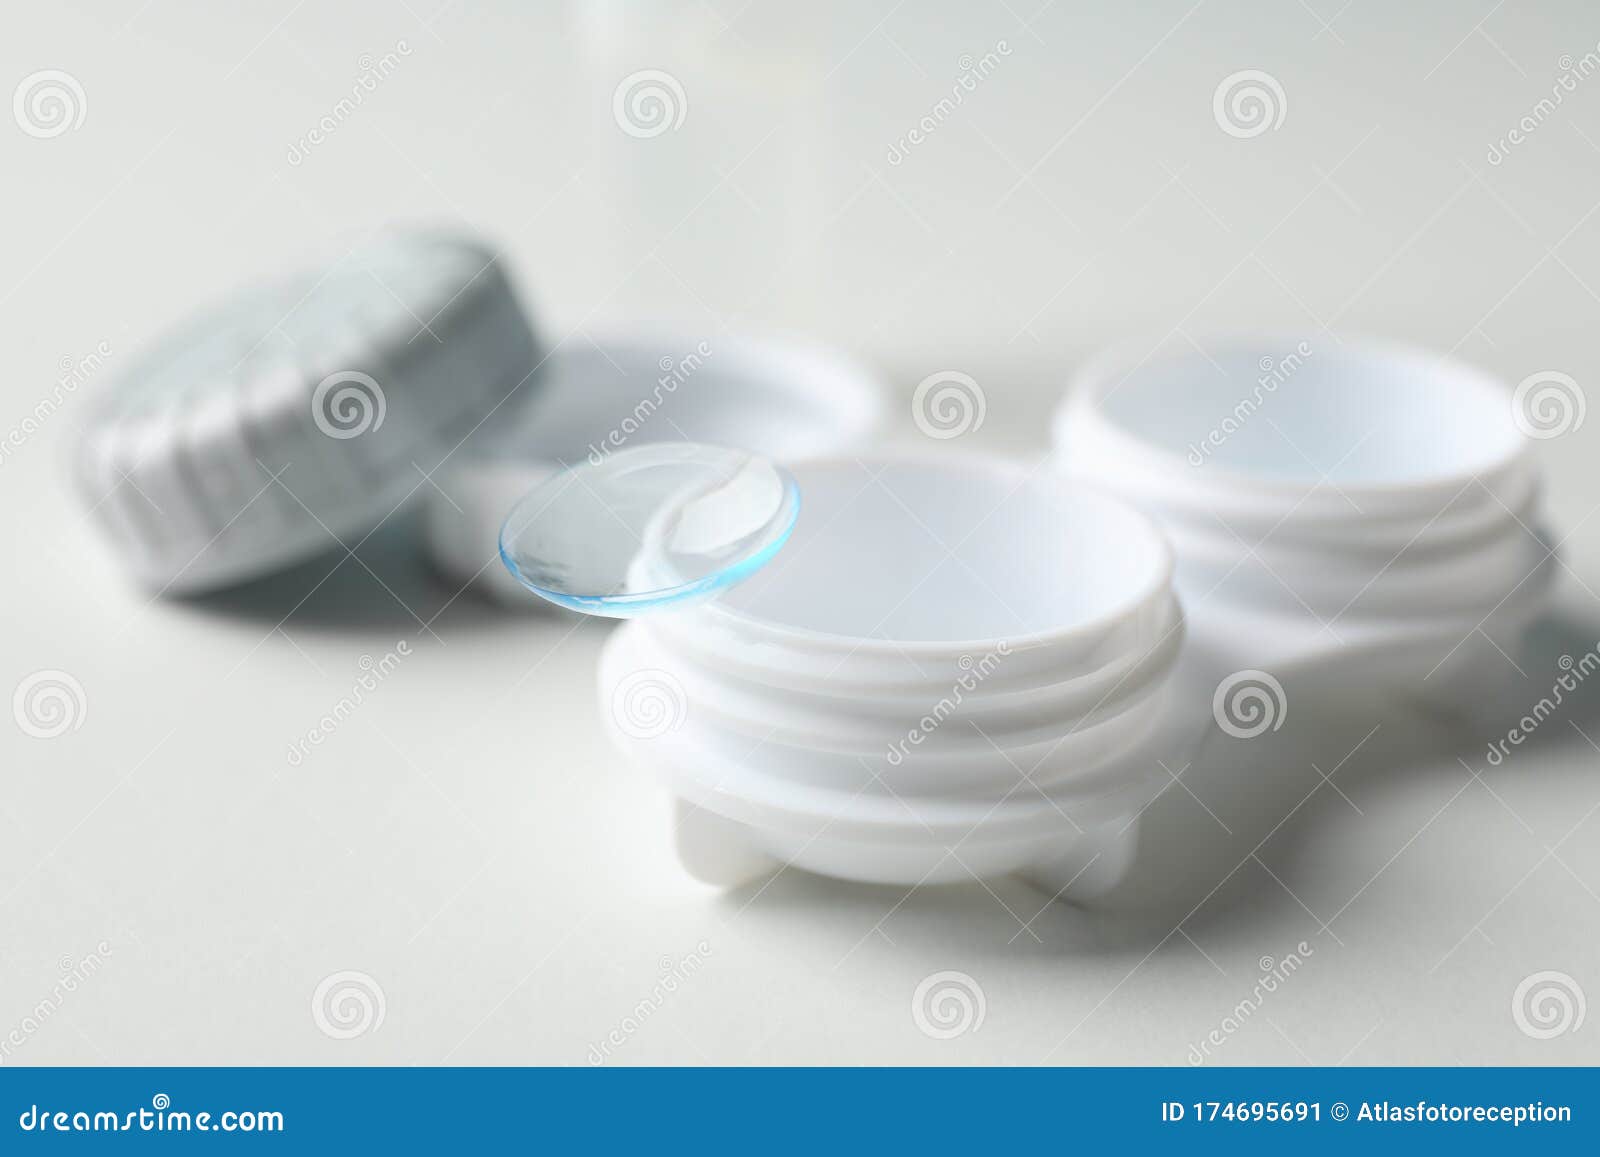 contact lenses and case on white background